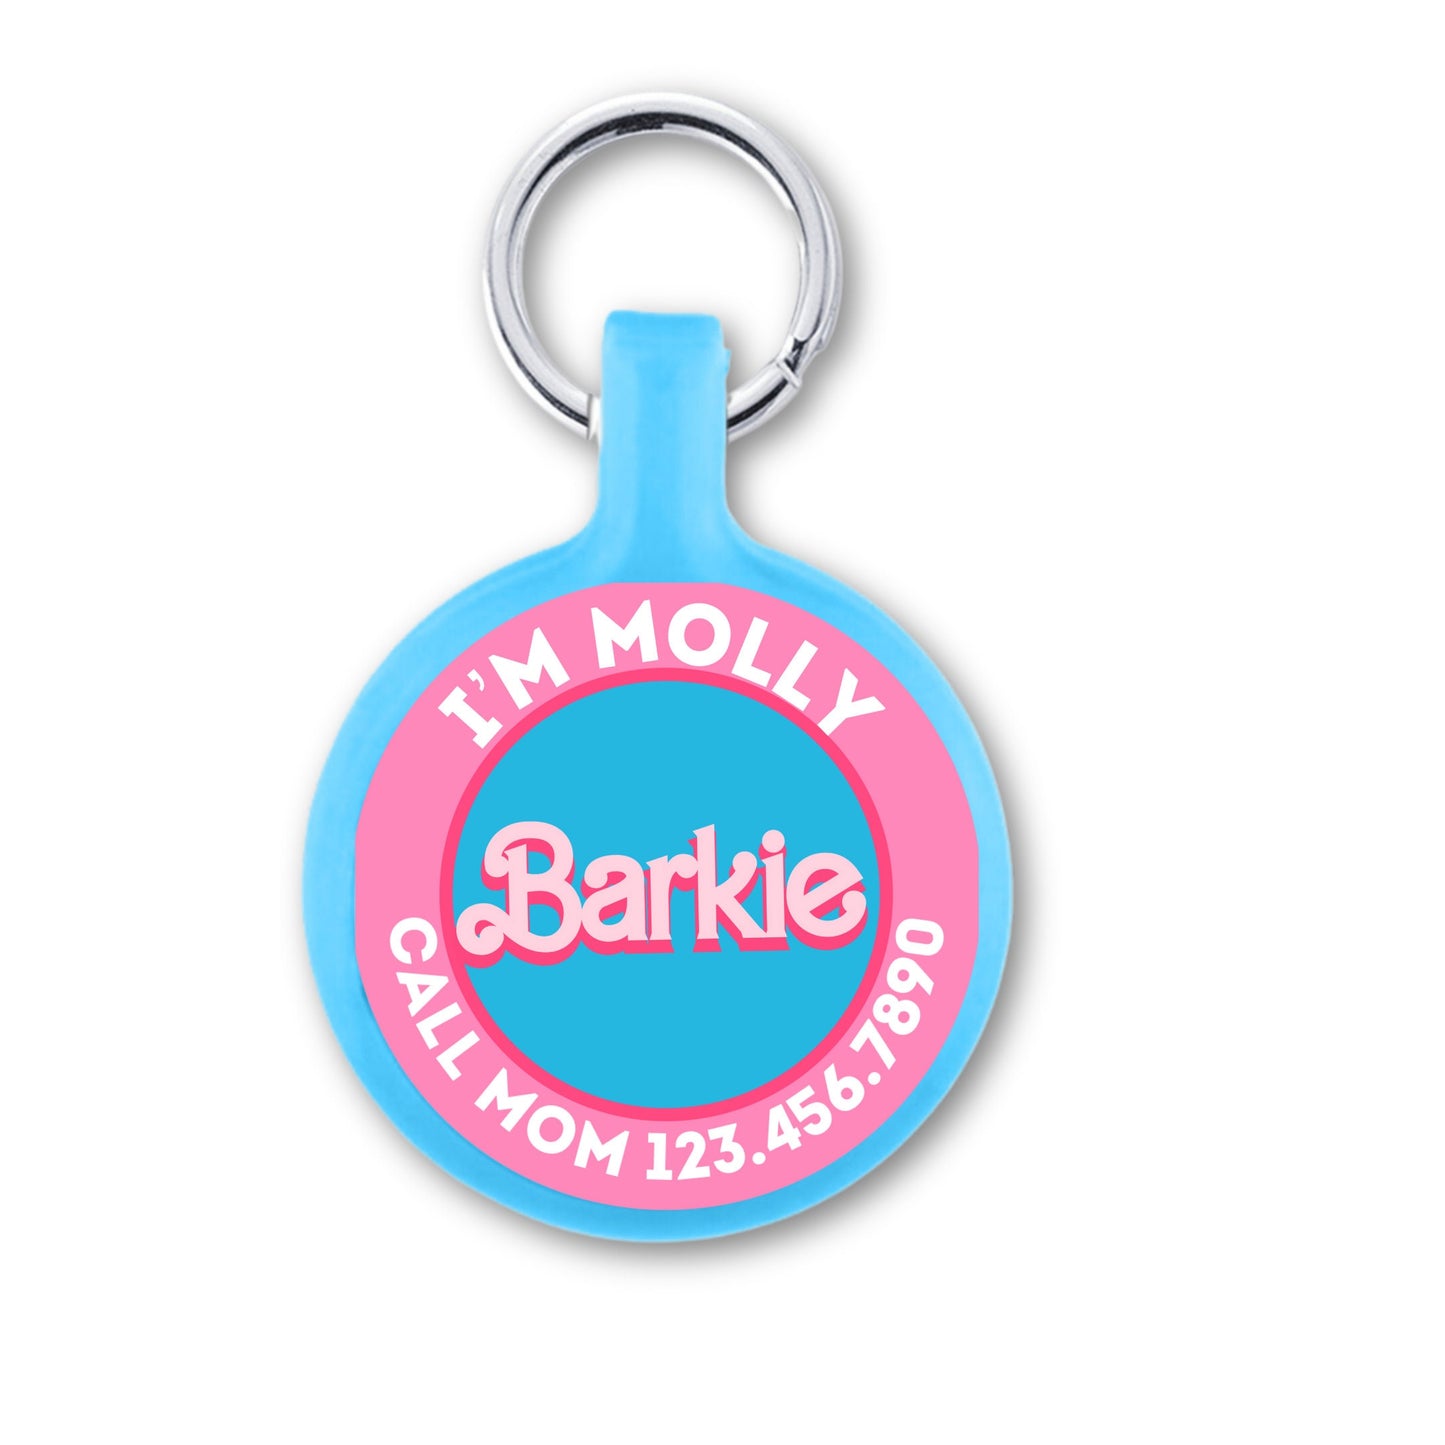 Barkie Pet ID Tag for Dogs Charm or Personalized Barbie & Ken